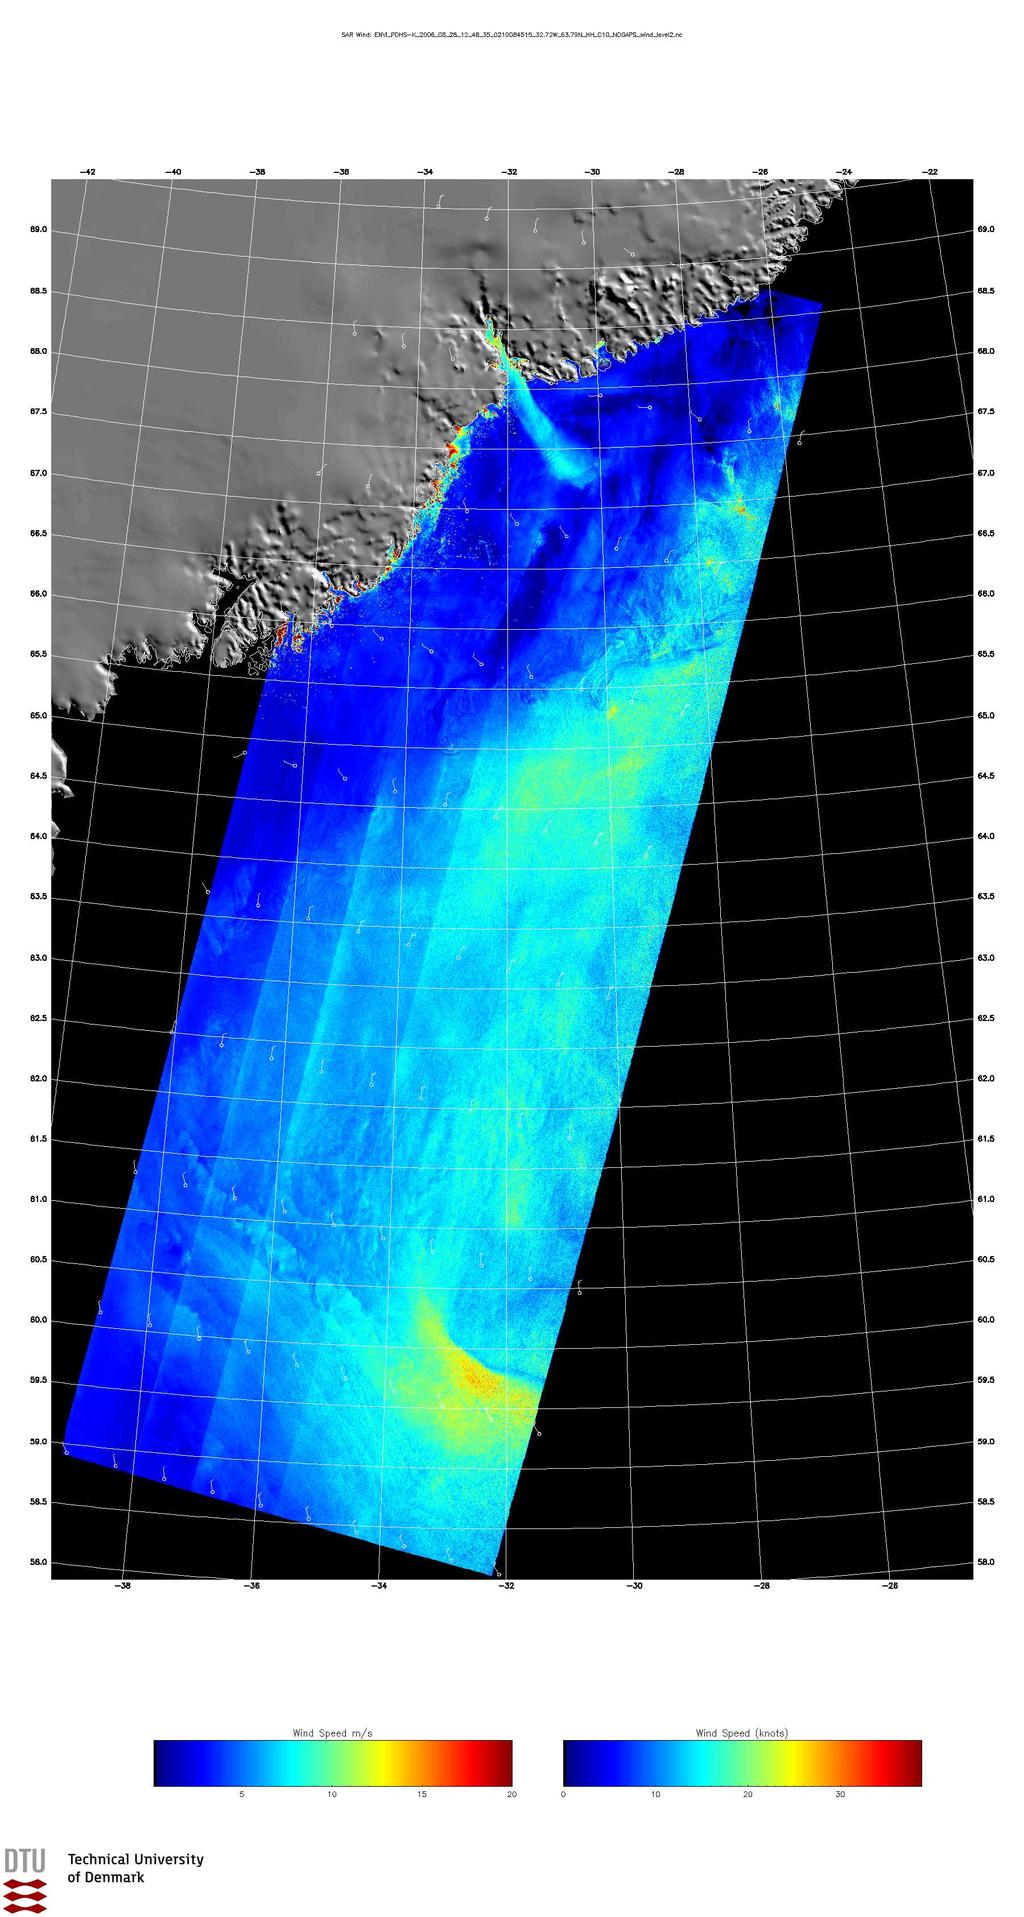 Figure 188: Envisat ASAR wind field from the east coast of Greenland observed 28 August 2006 at 12:47 UTC. Note the katabatic flow around 68 N, 31 W extending around 100 km into the Danish Strait.